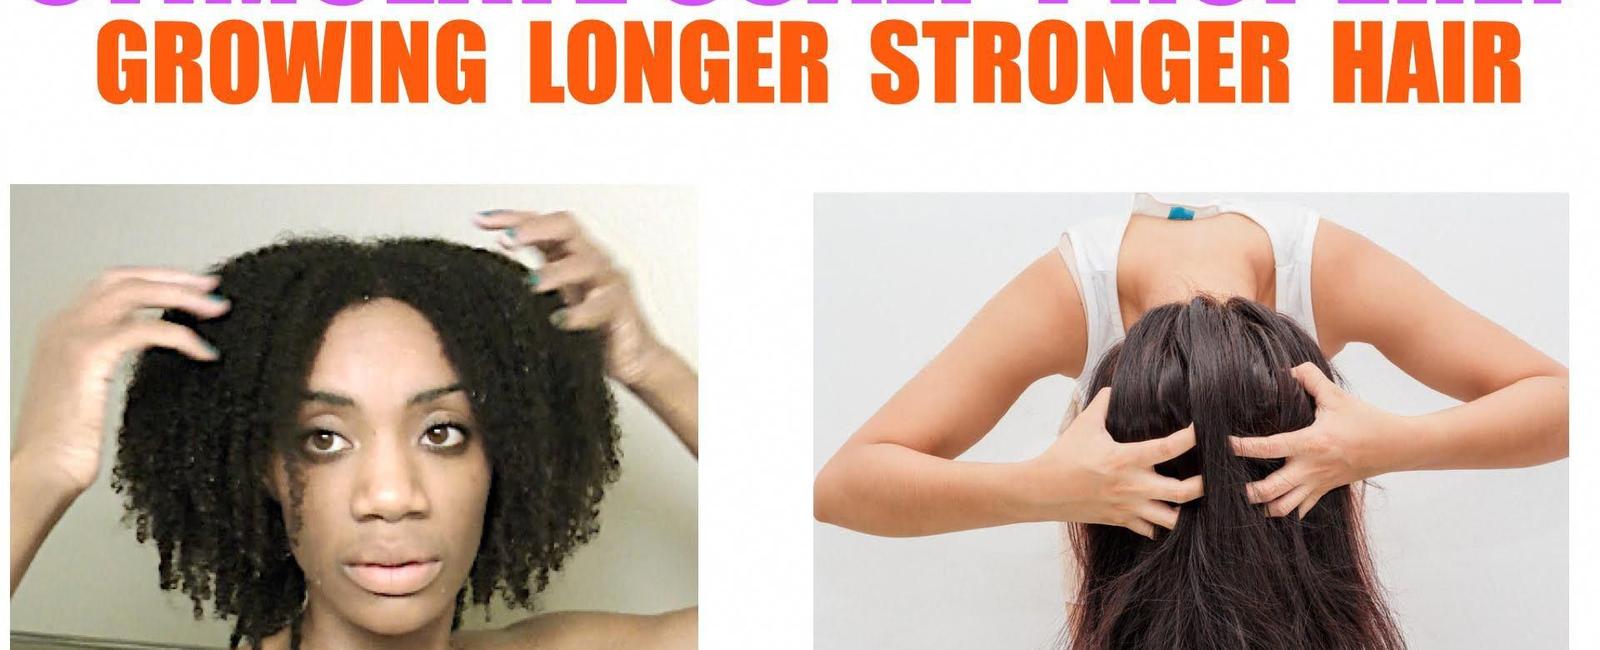 All of the hair on a human scalp would together be strong enough to hold 10 15 tons of weight